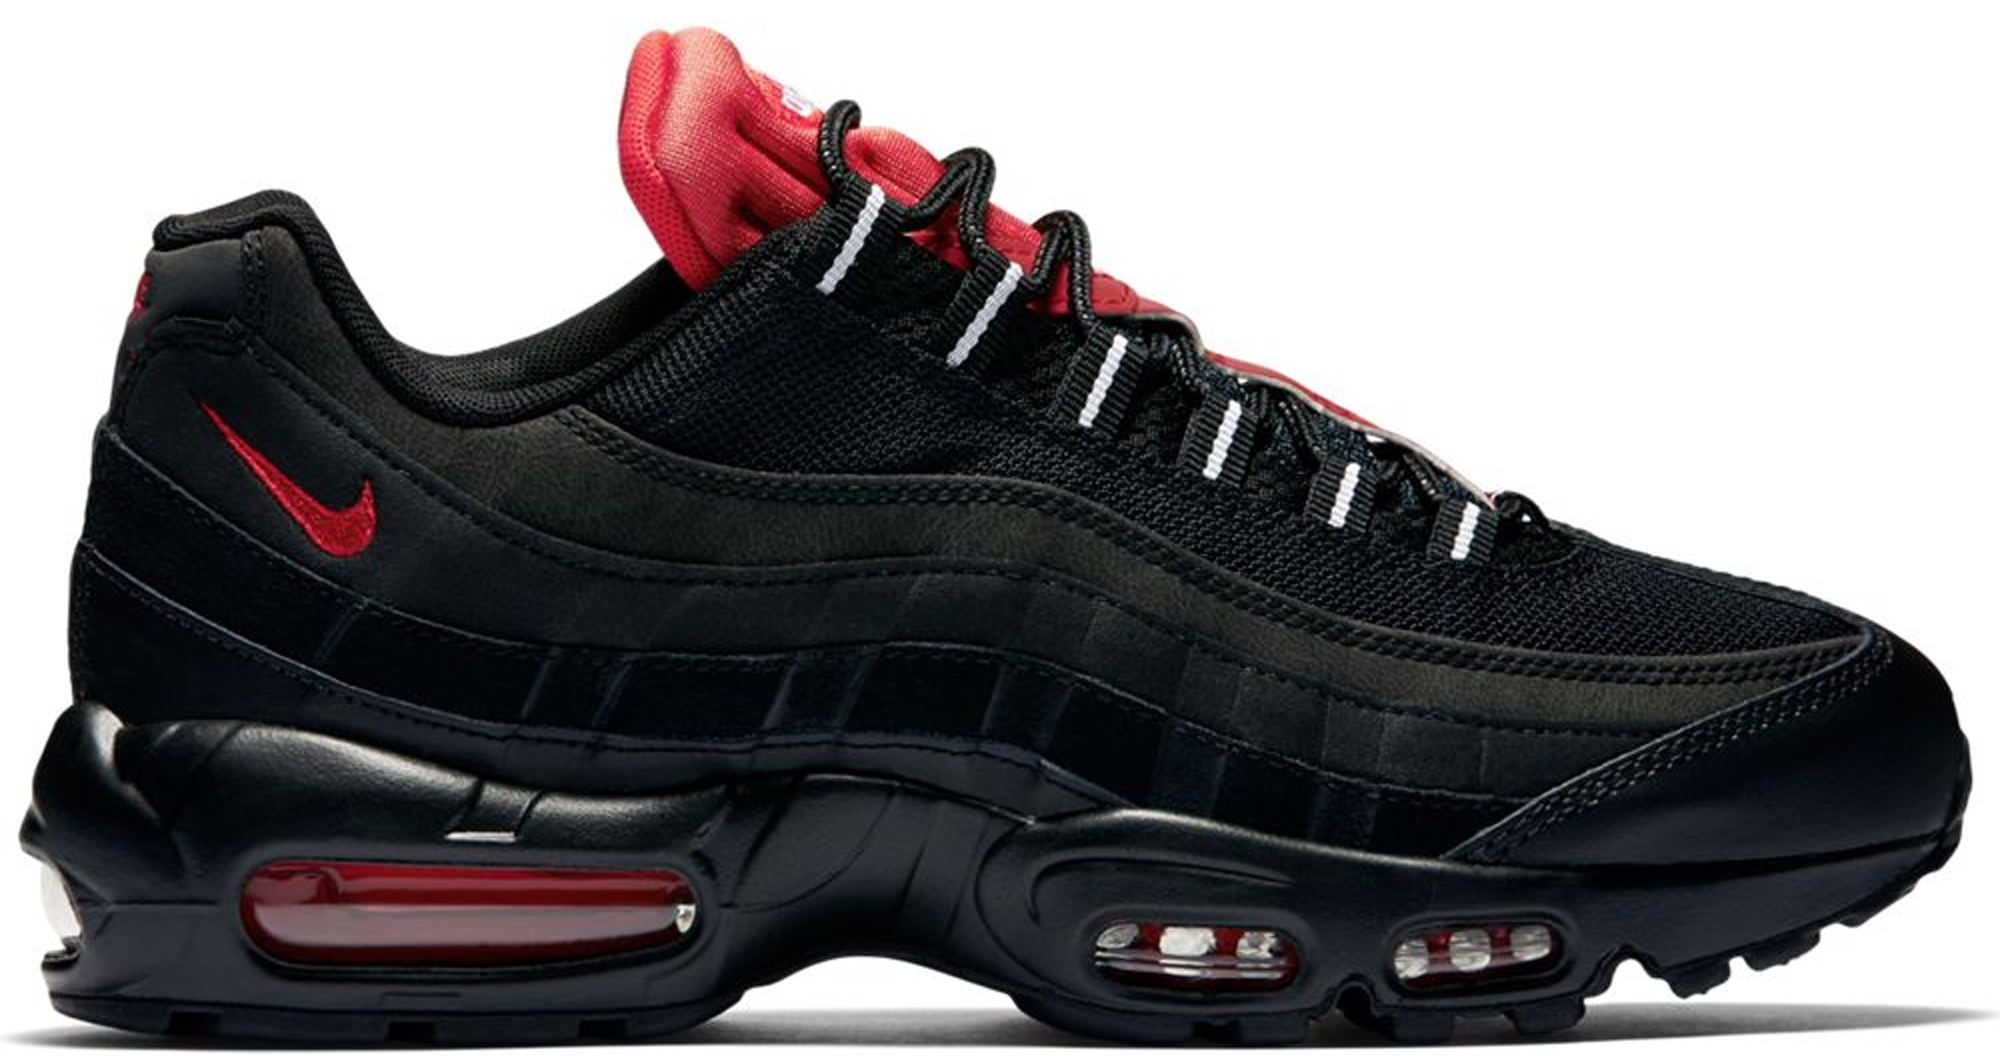 air max 95 black challenge red